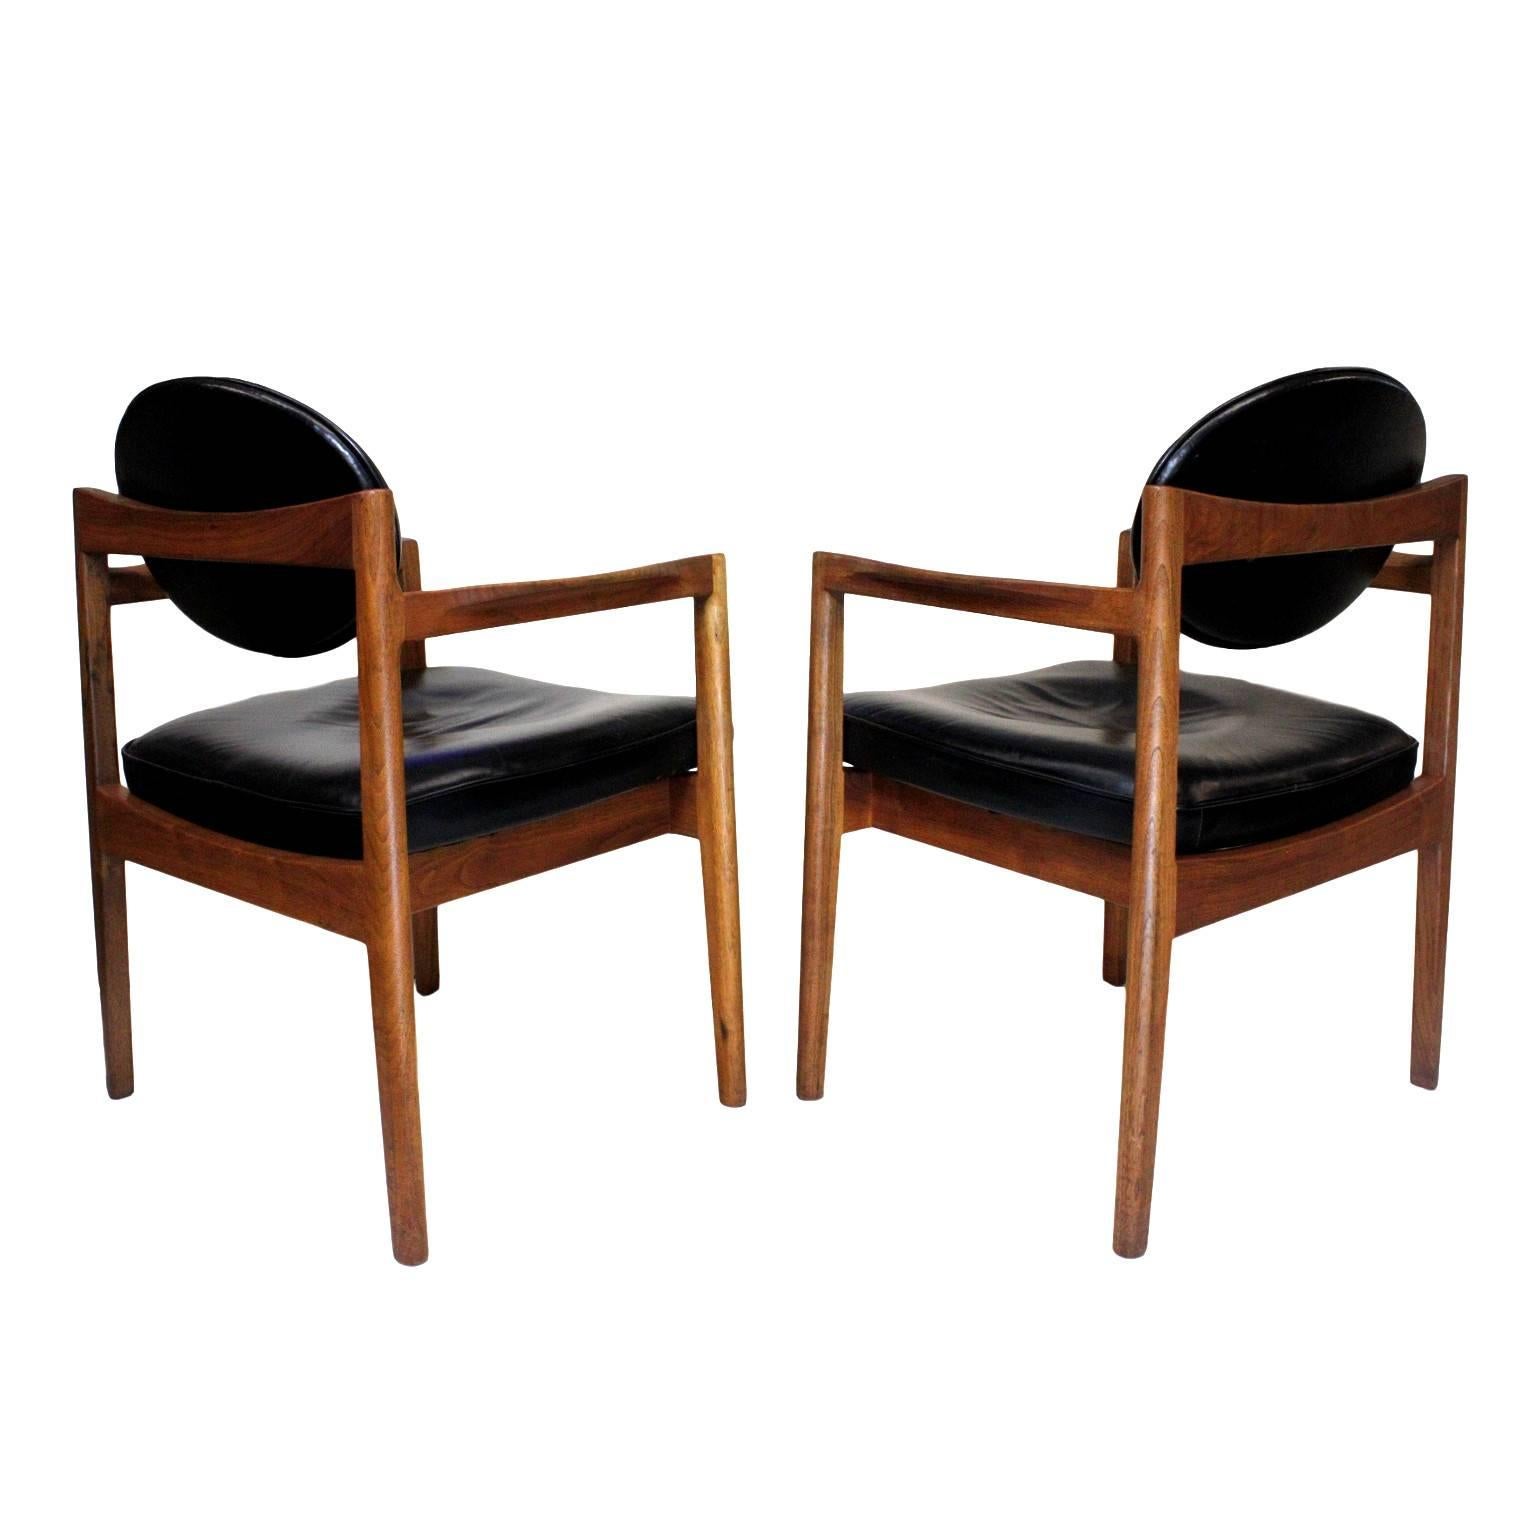 American Pair of Mid-Century Modern Black Leather Oval-Back Armchairs by Jens Risom